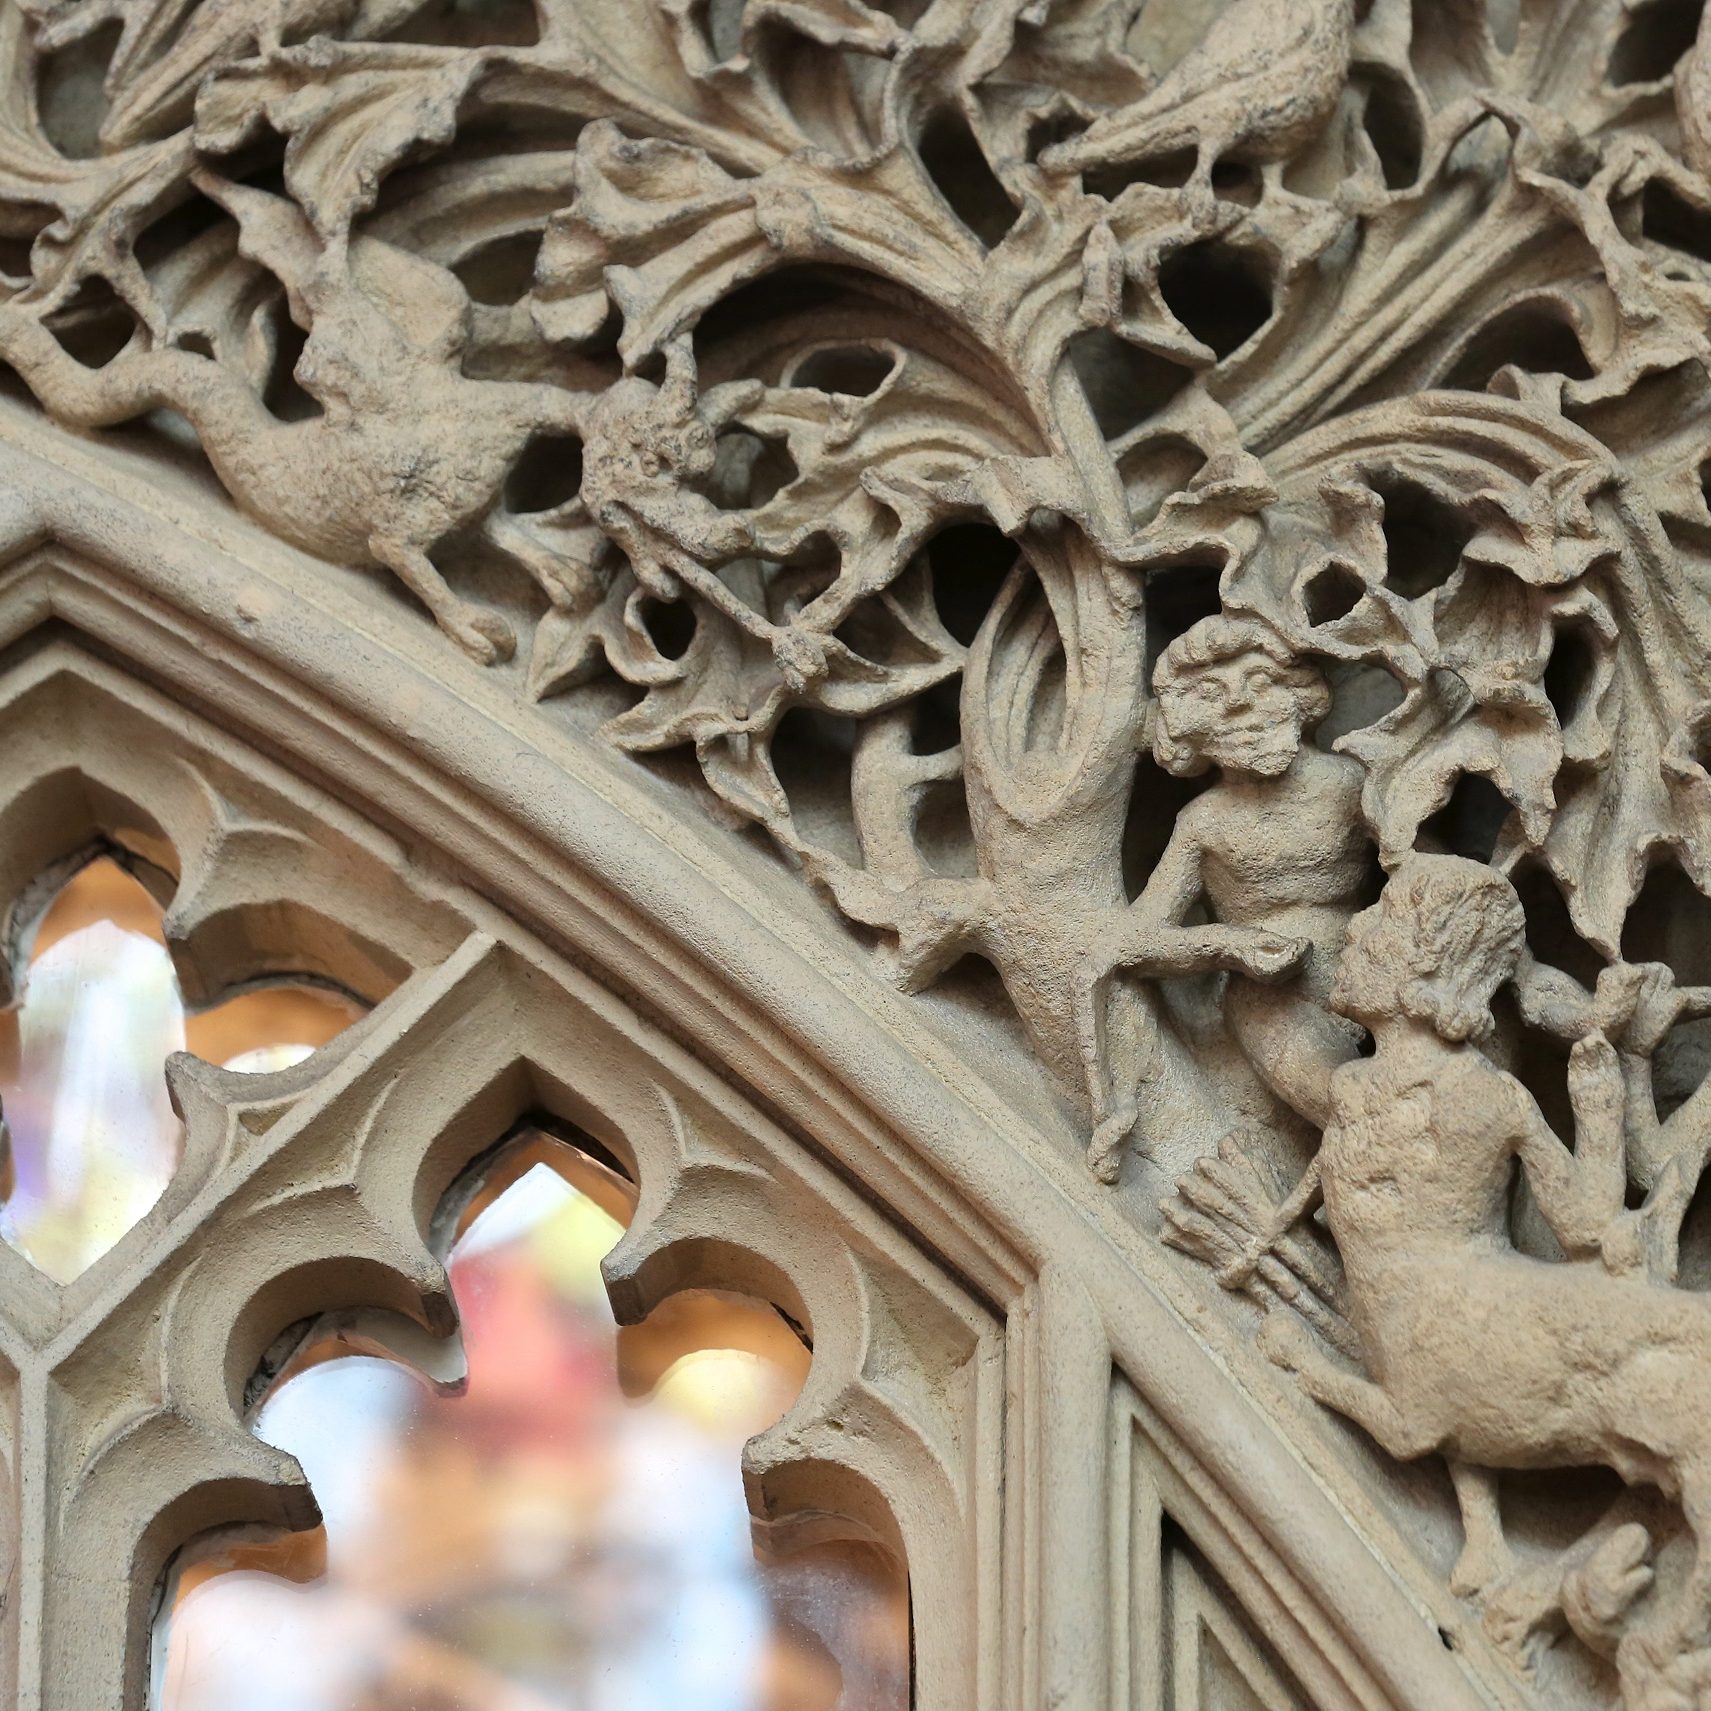 Detail of intricate stone carving in the Birde Chantry at Bath Abbey